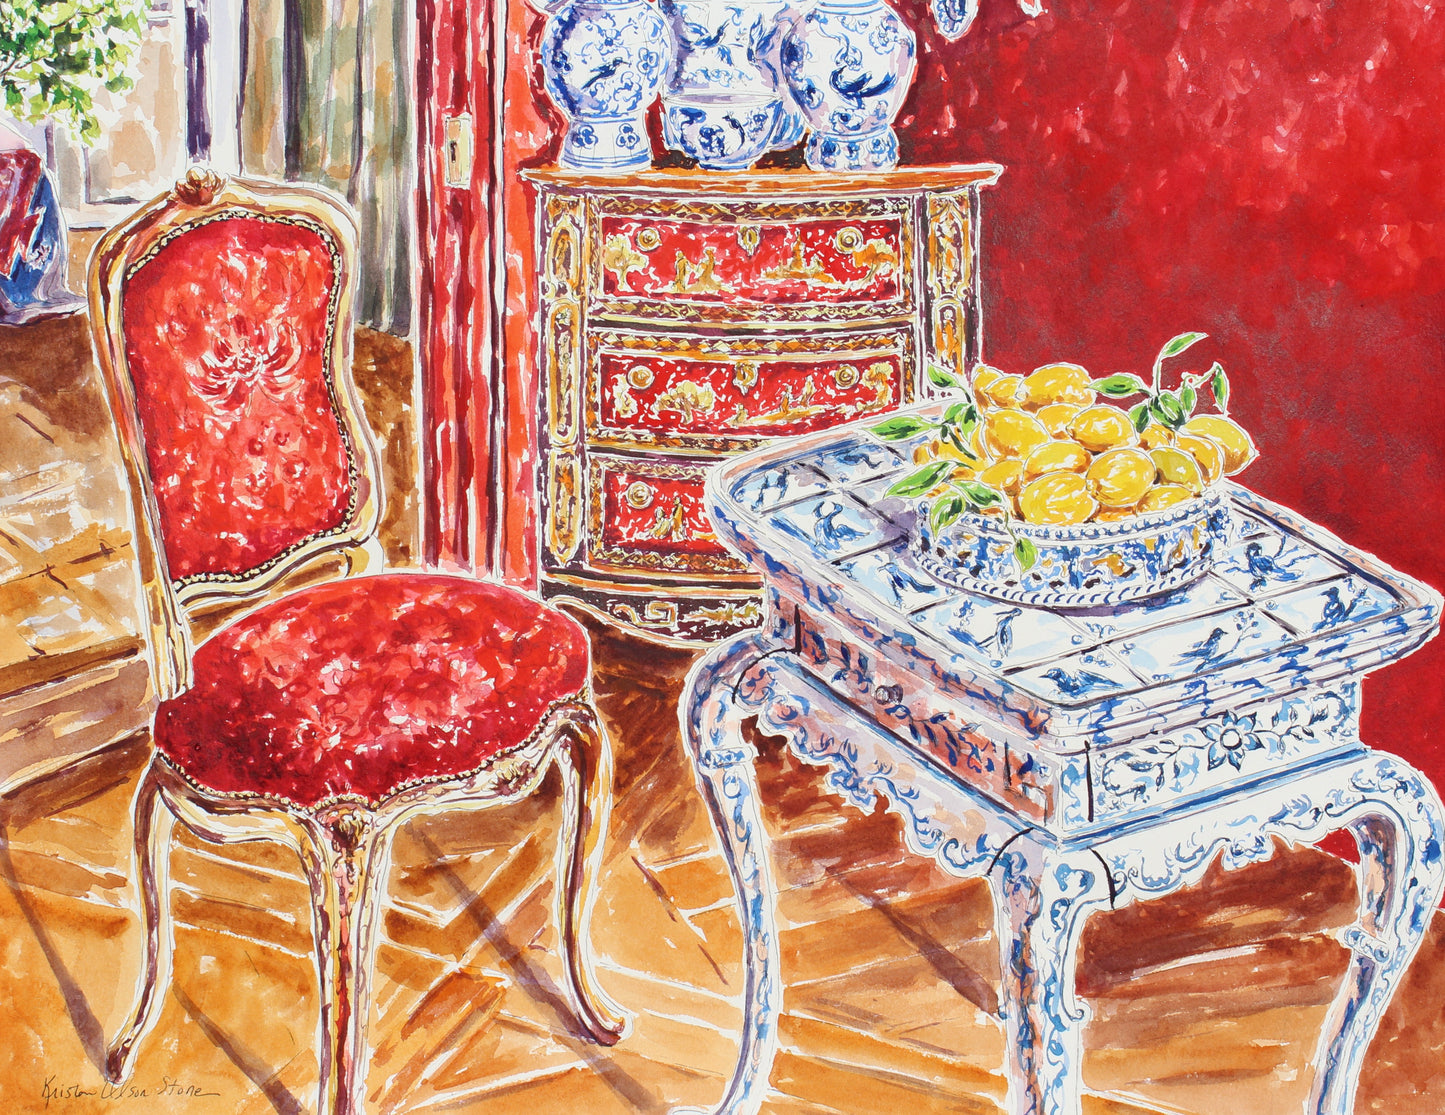 Opulent Chinoiserie, 30" x 22" Original Watercolor And Ink Painting Of Blue And White Ceramics And A Red Wall